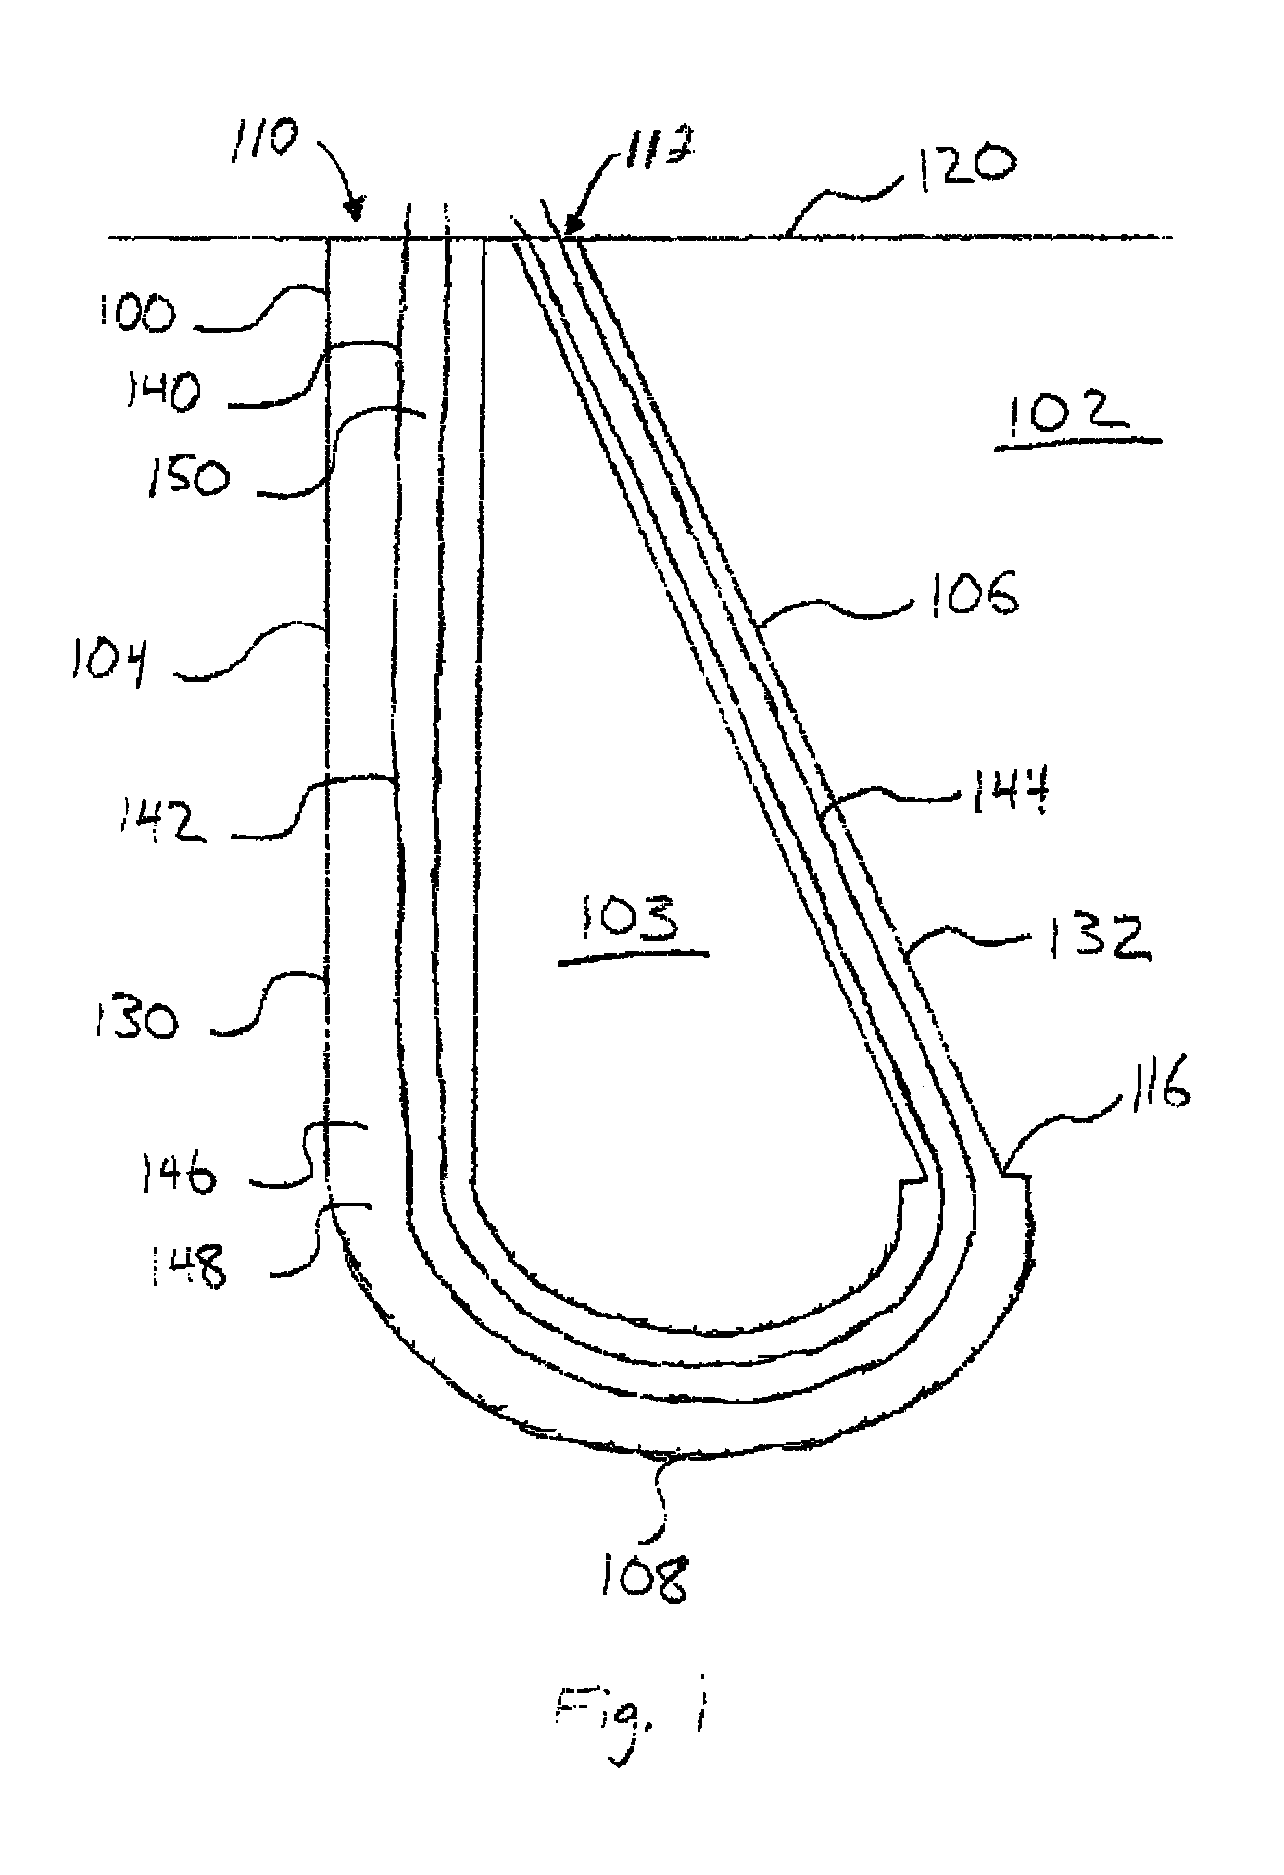 Method for forming a geothermal well